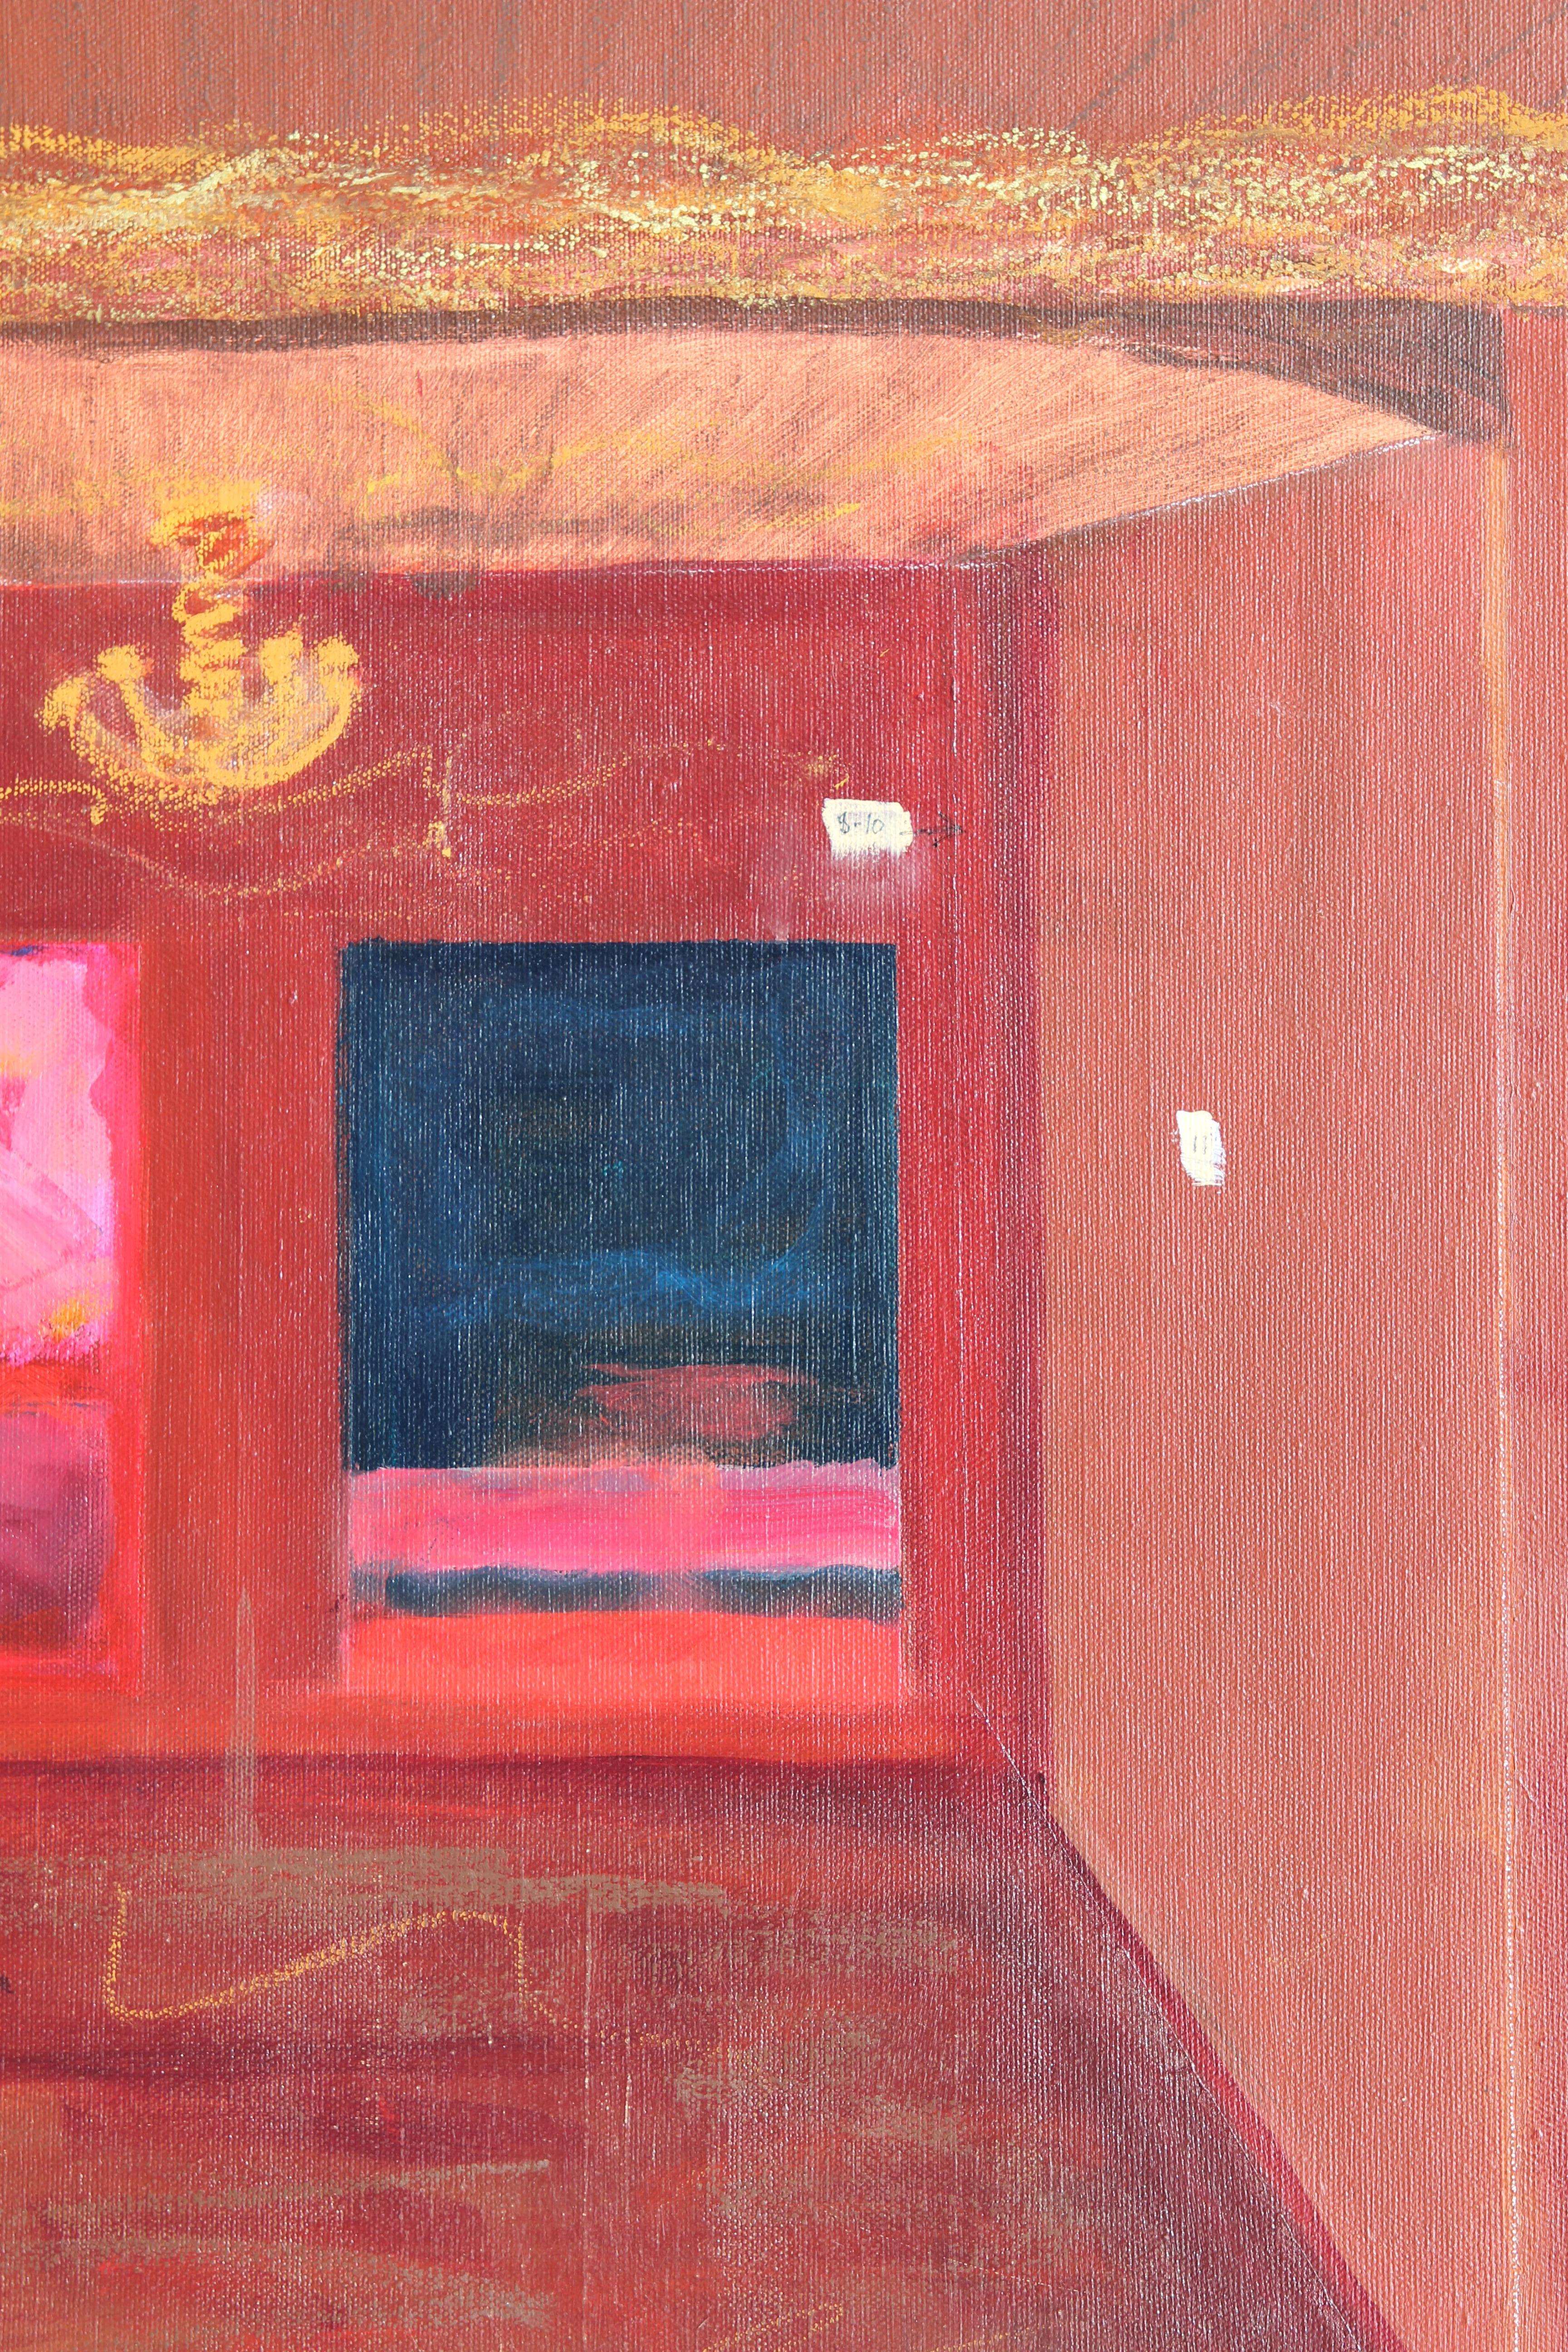 Large red and brown toned gallery space of a selection of the artist's own work in the style of Mark Rothko's color field paintings. This piece is part of a series that the artist did exploring her own paintings in relation the galleries they were